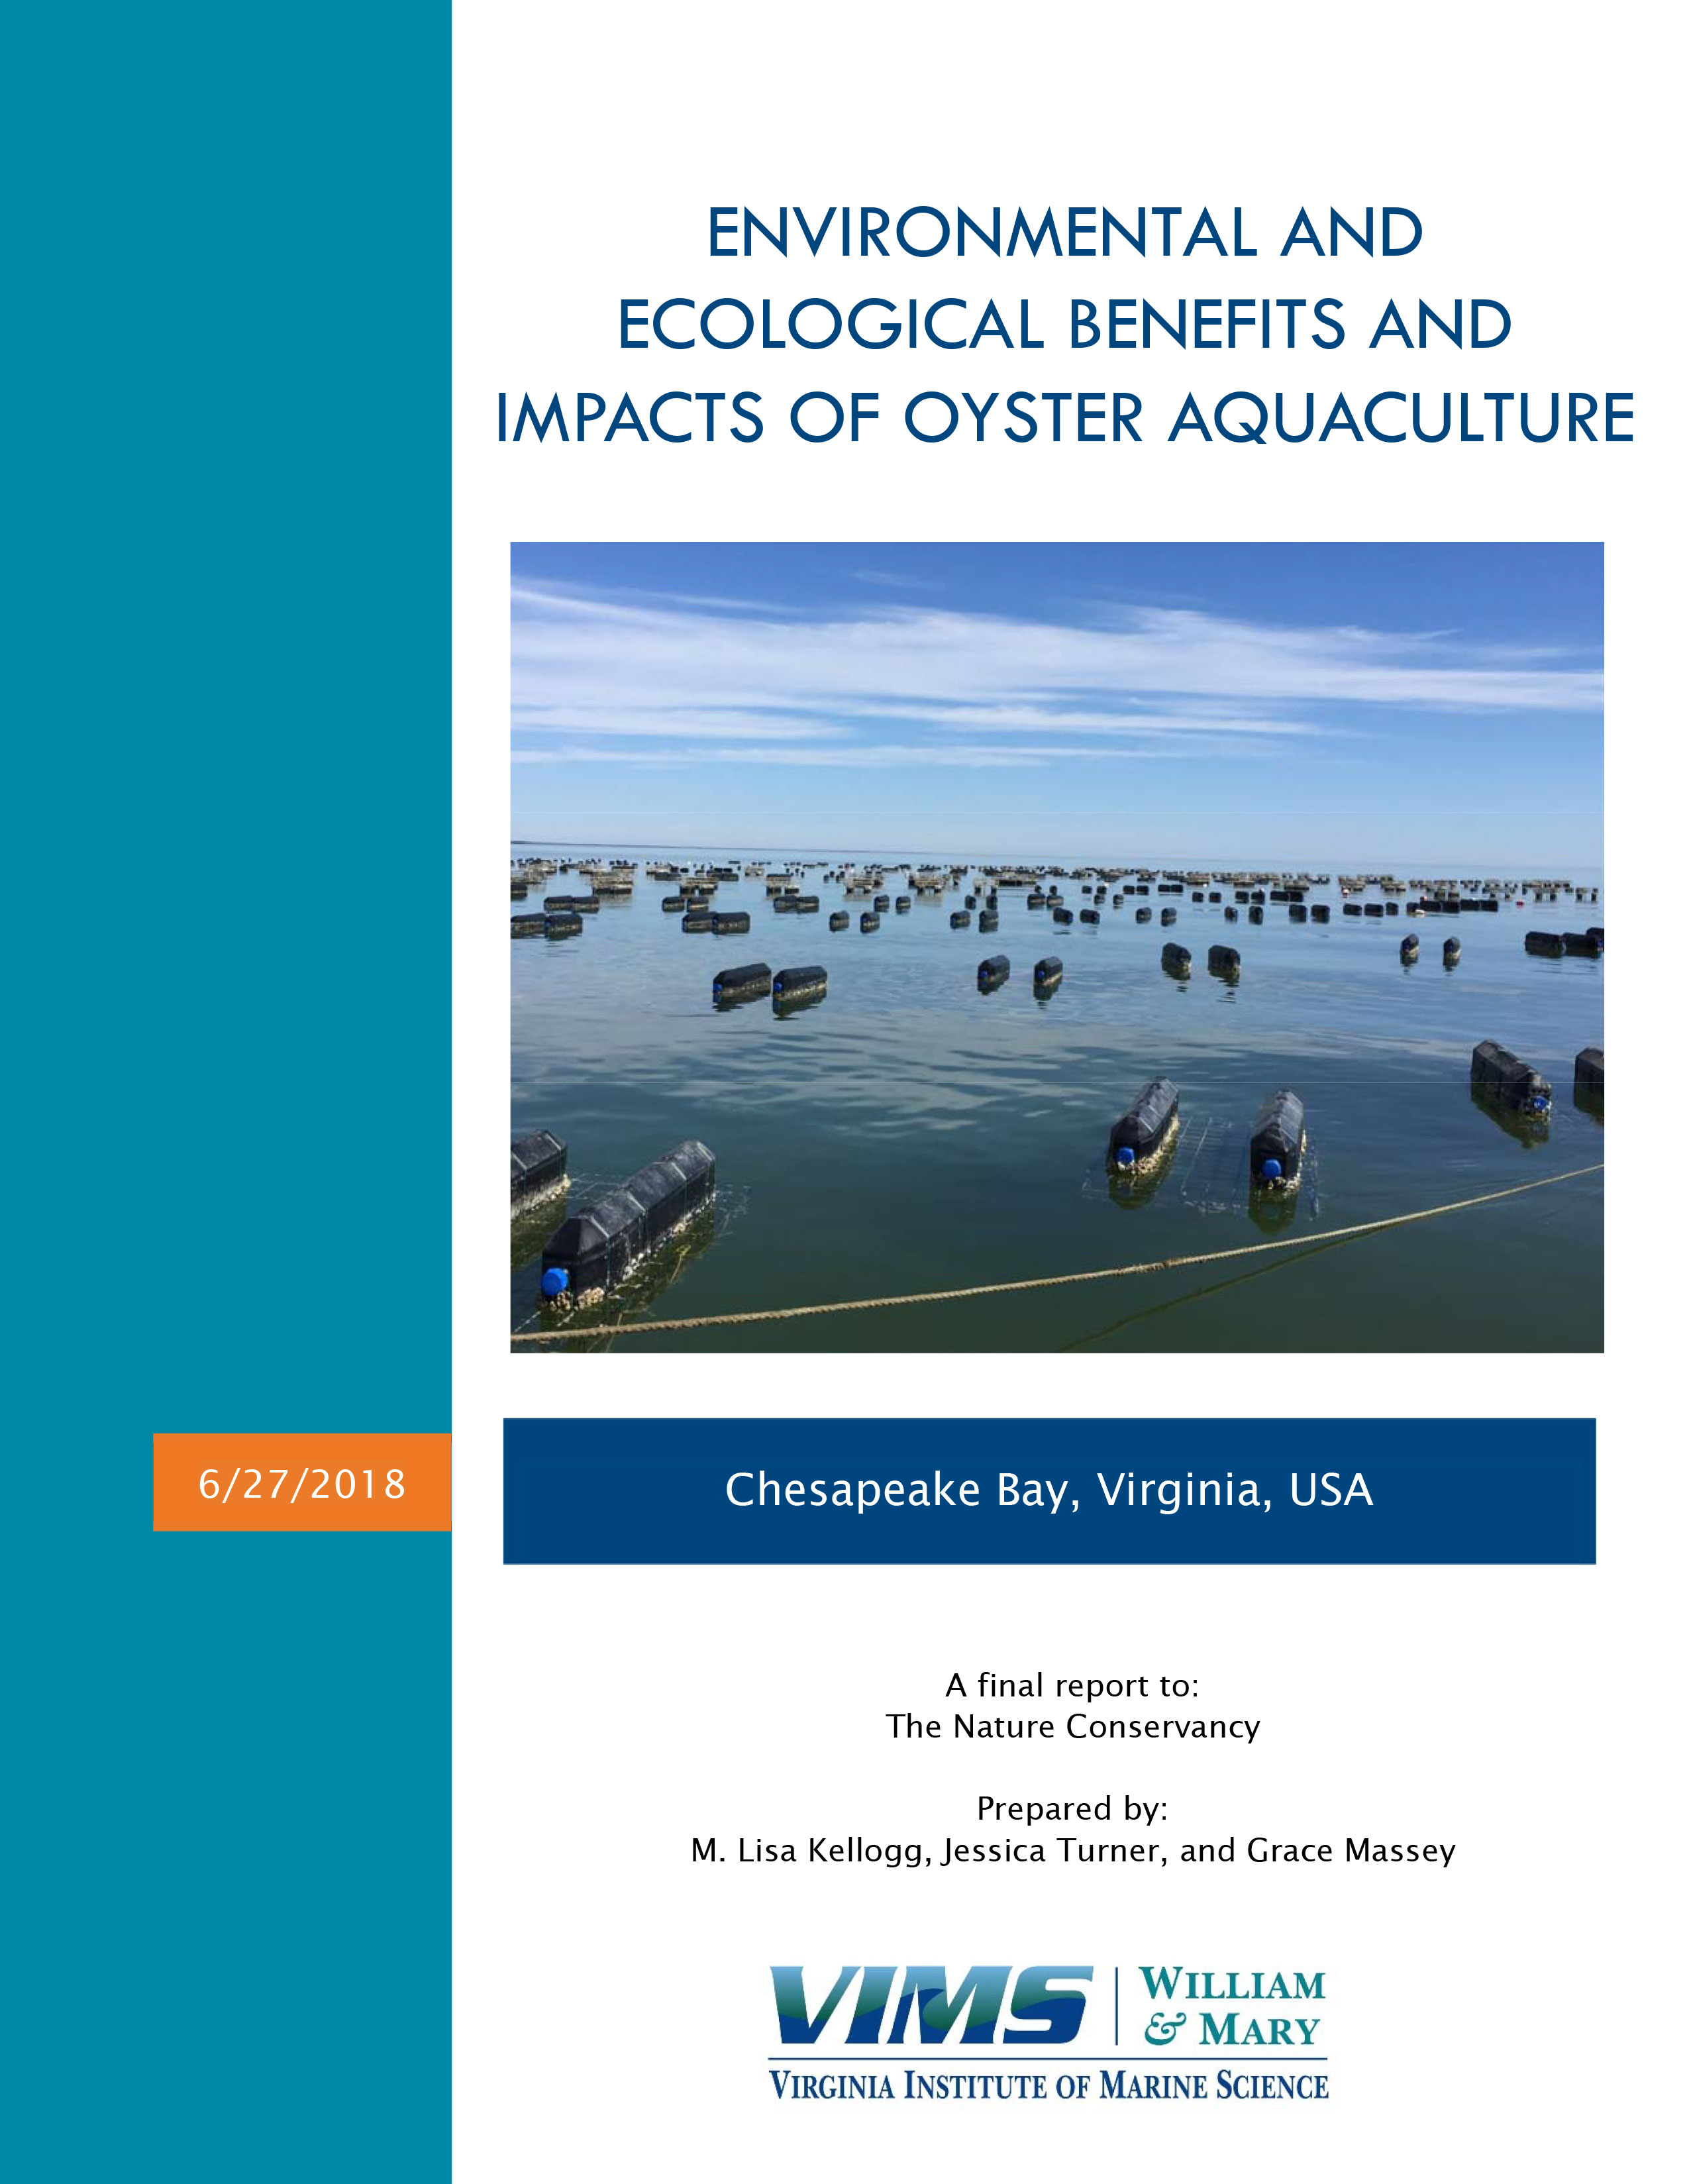 Final report on the environmental and ecological benefits and impacts of oyster aquaculture.